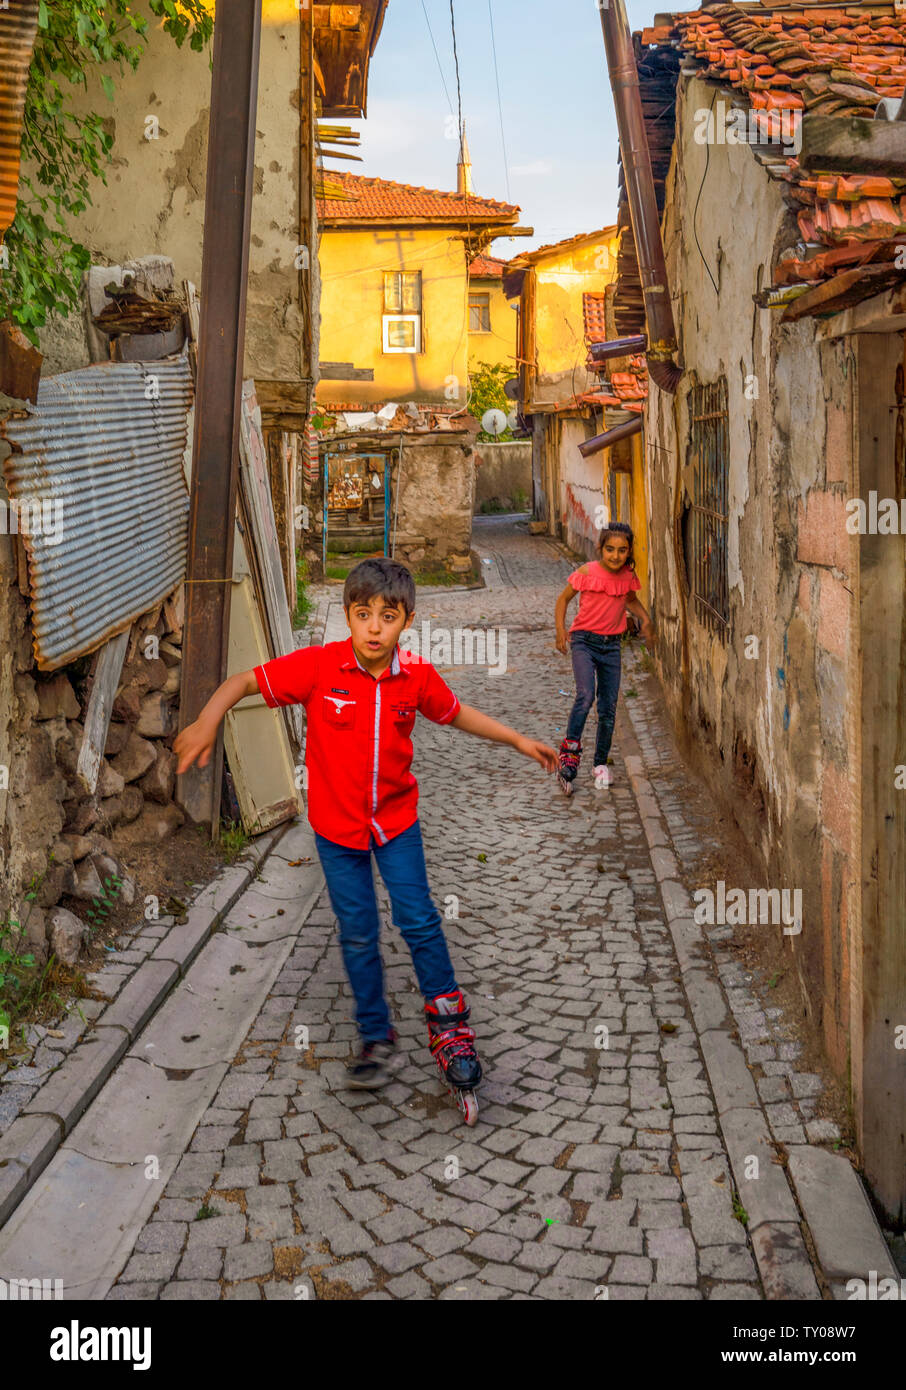 Ankara/Turkey-June 16 2019: Children playing with roller skate on the street near Ankara Castle. Concept of sharing. Children use only one roller skat Stock Photo